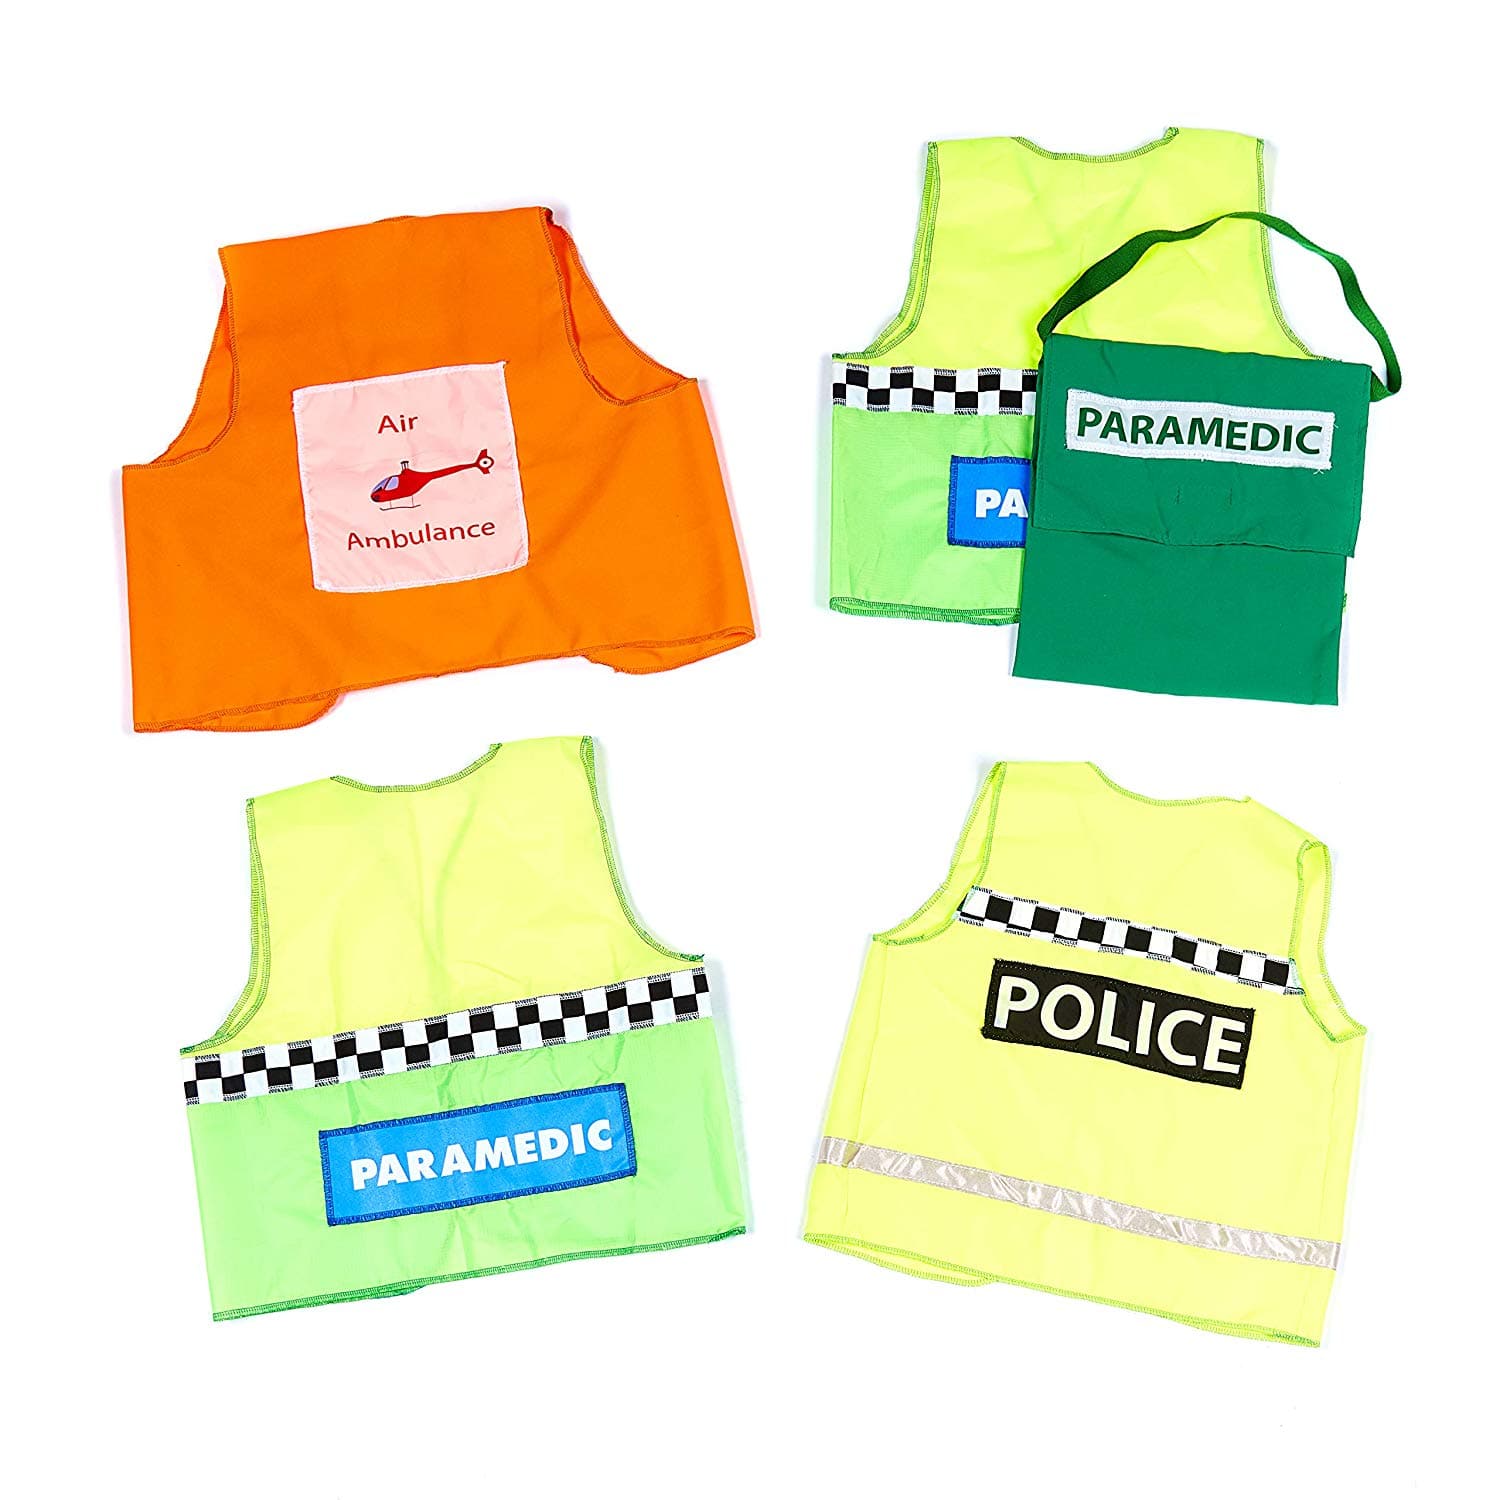 Accident Response Role Play Set, Introducing our Set of Role Play Accident Response Waistcoats, the perfect addition to your dressing up box! This set includes four dressing up waistcoats, specifically designed for emergency services role play.With two paramedic waistcoats, a police waistcoat, an air ambulance waistcoat, and a first aid kit bag, this set offers endless possibilities for imaginative play. Whether your little one dreams of being a hero in the medical field, a brave police officer, or a fearle